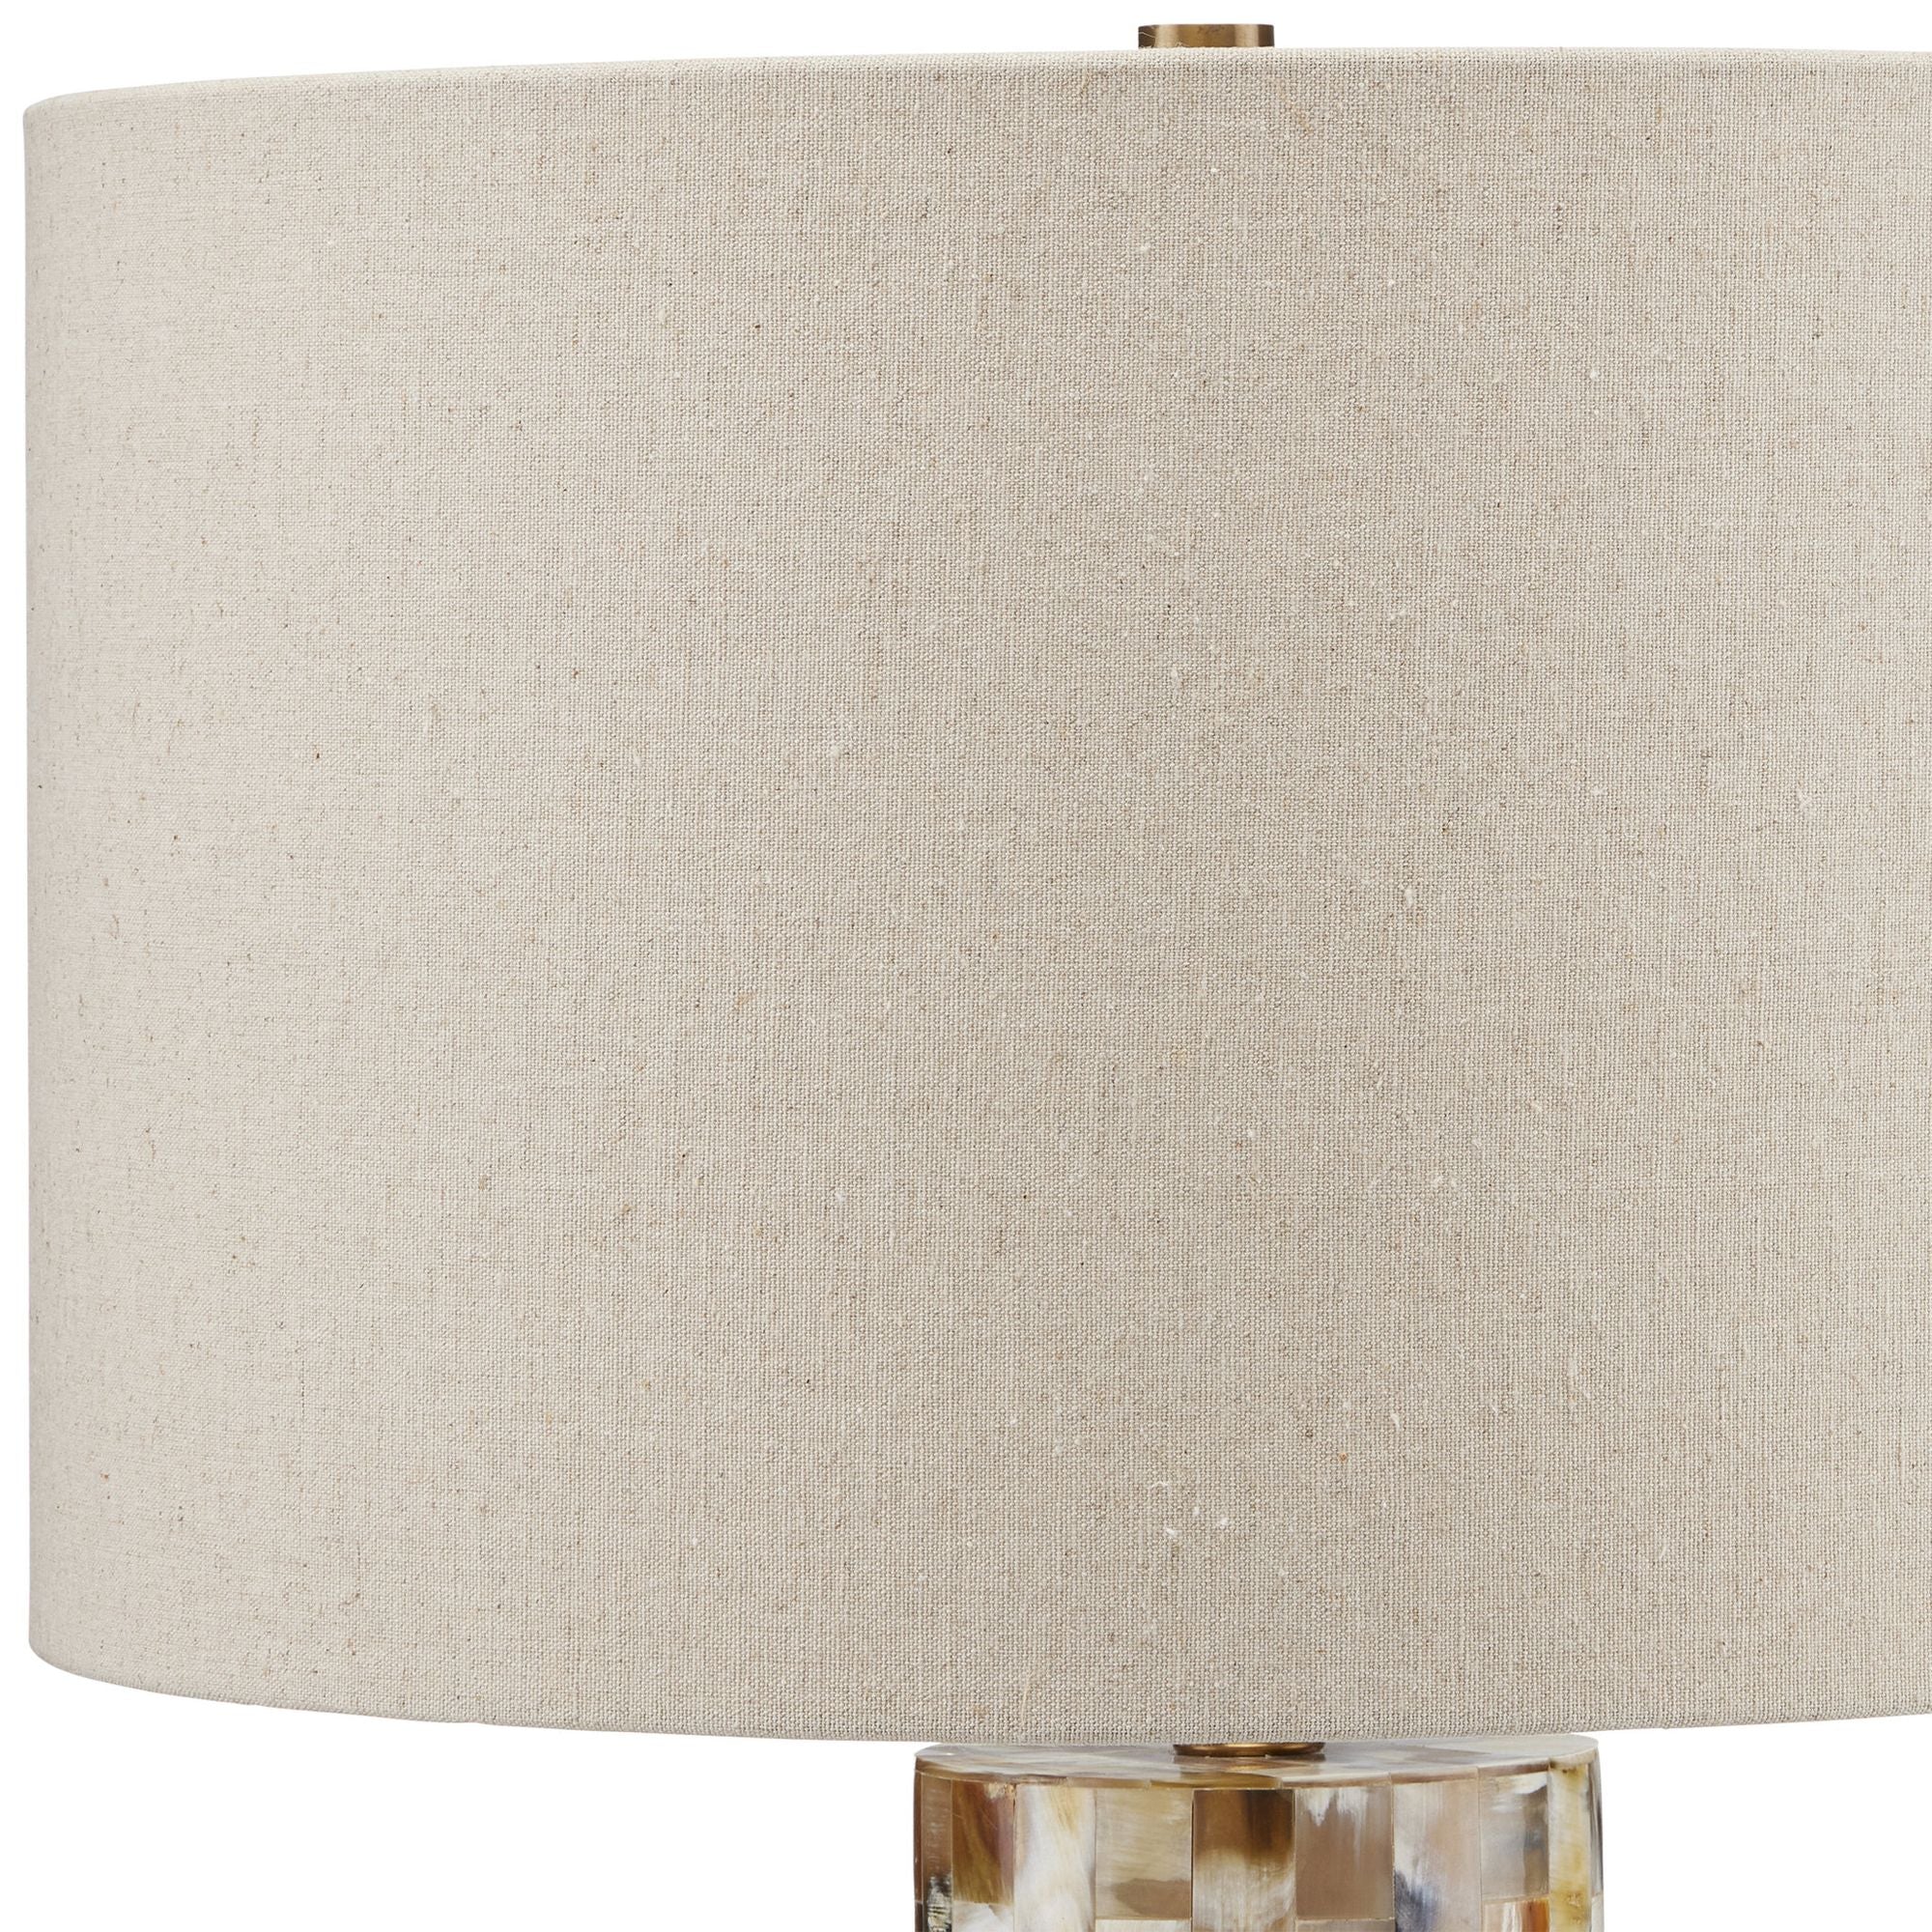 Colevile Table Lamp - Natural